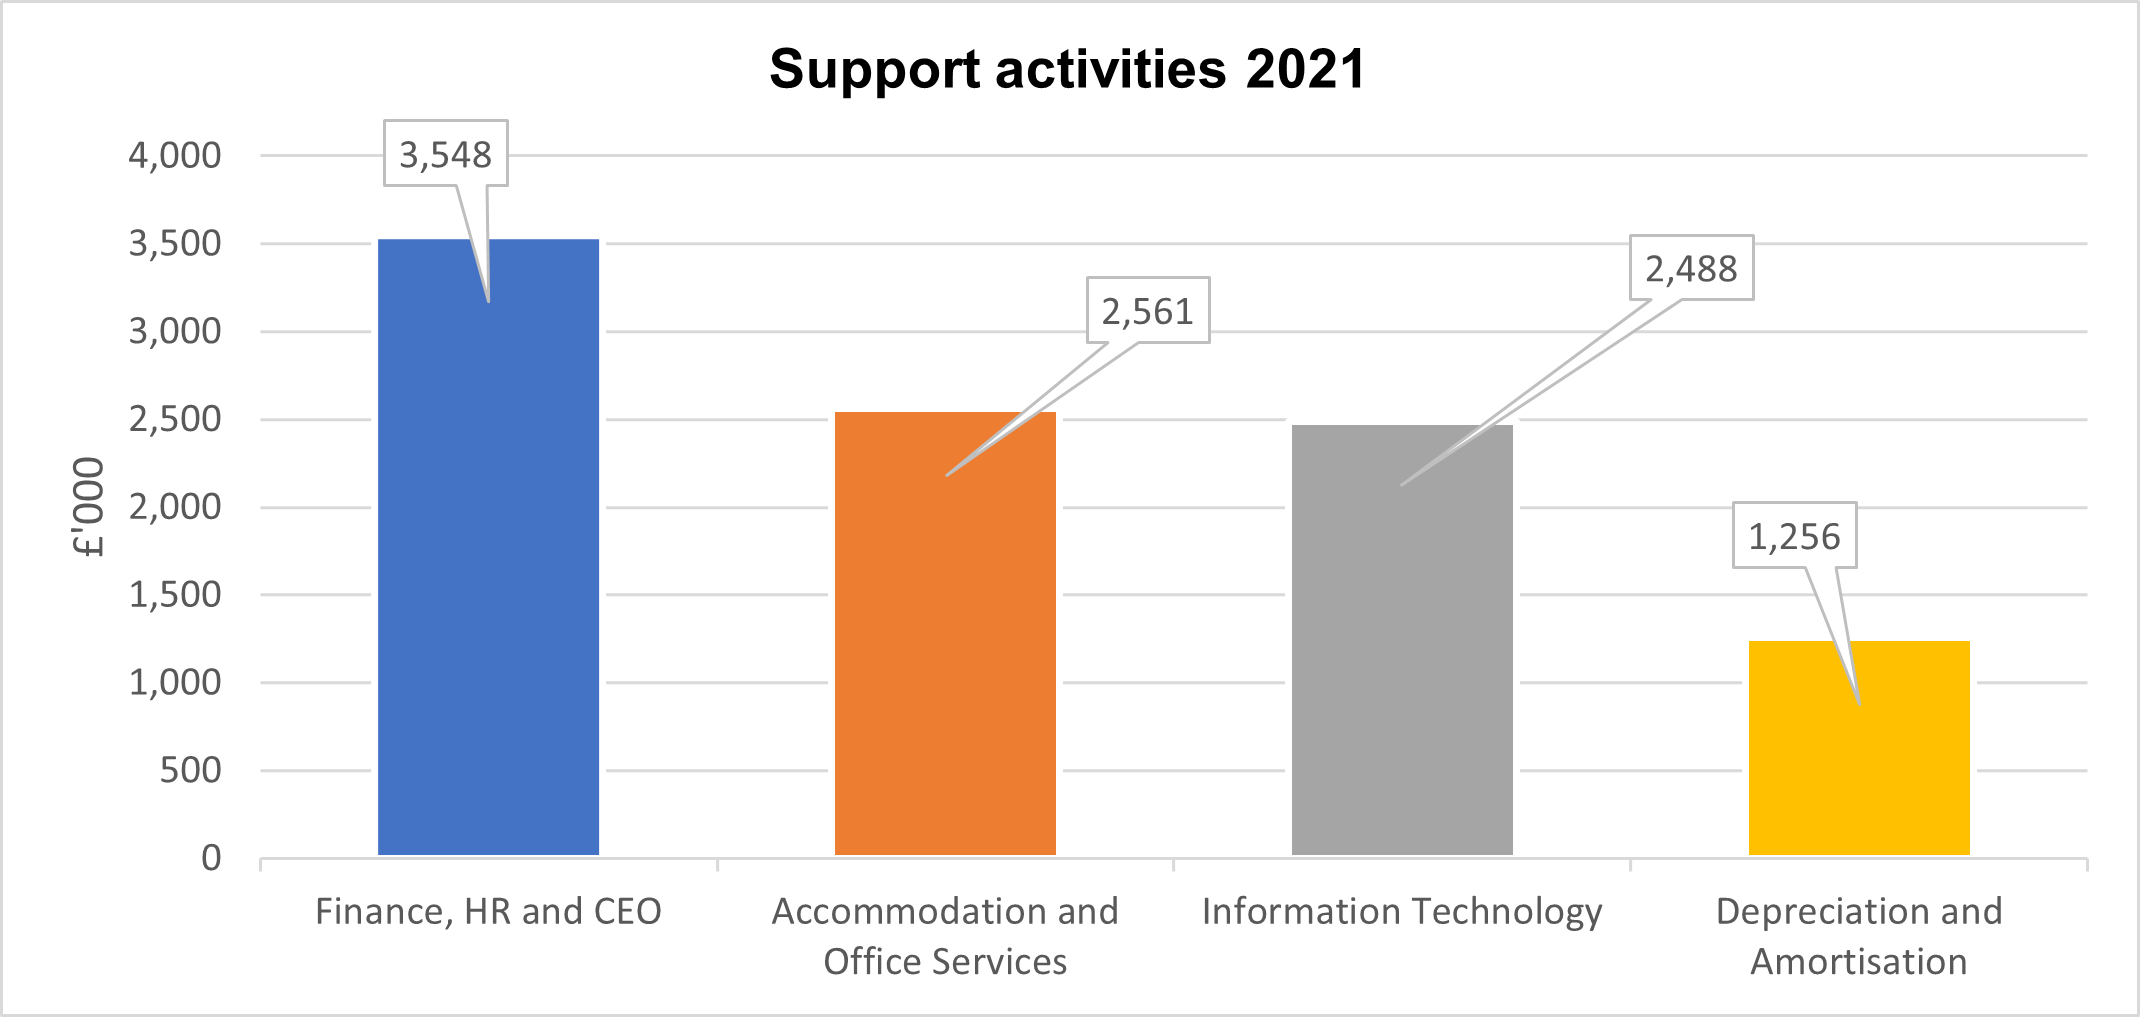 Bar chart showing support activities 2021